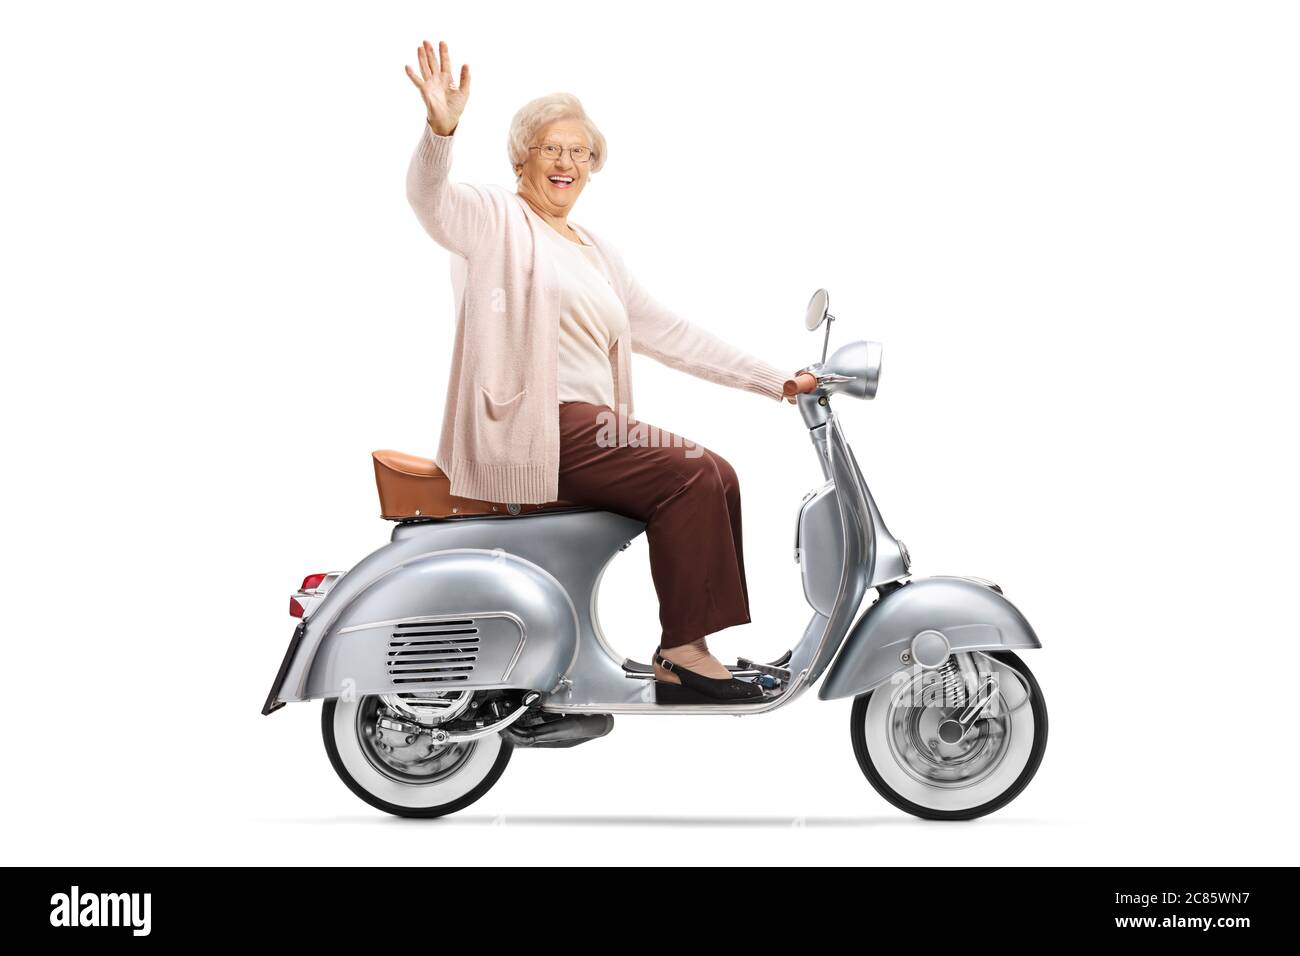 Profile shot of an elderly woman riding a vintage silver scooter and greeting with hand isolated on white background Stock Photo